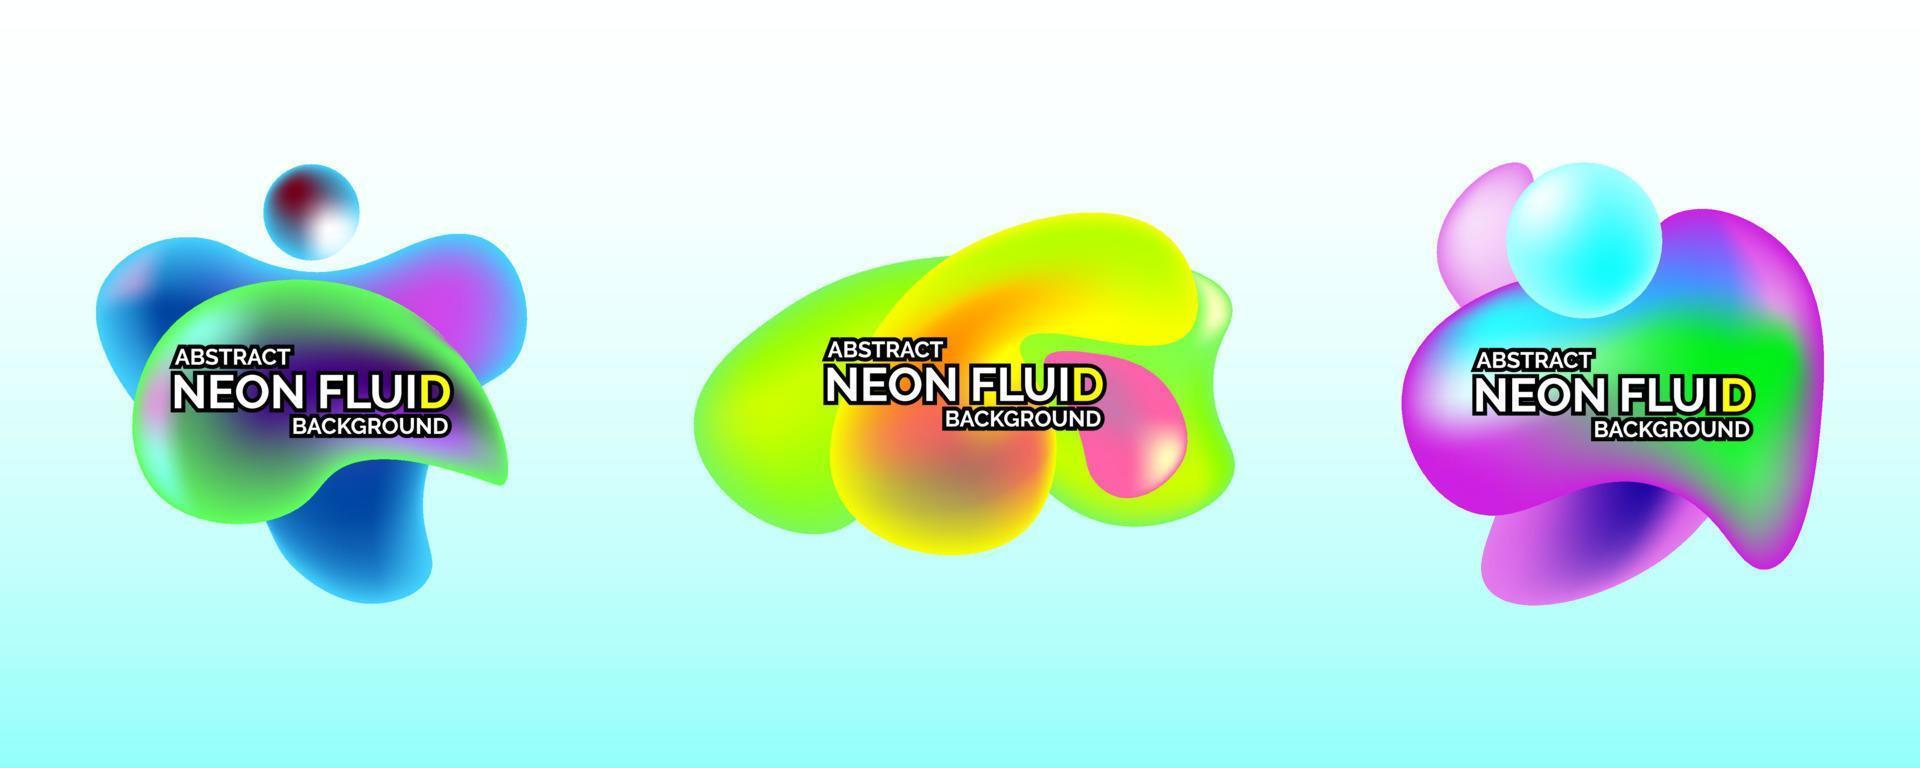 abstract liquid neon fluid element for web or print vector